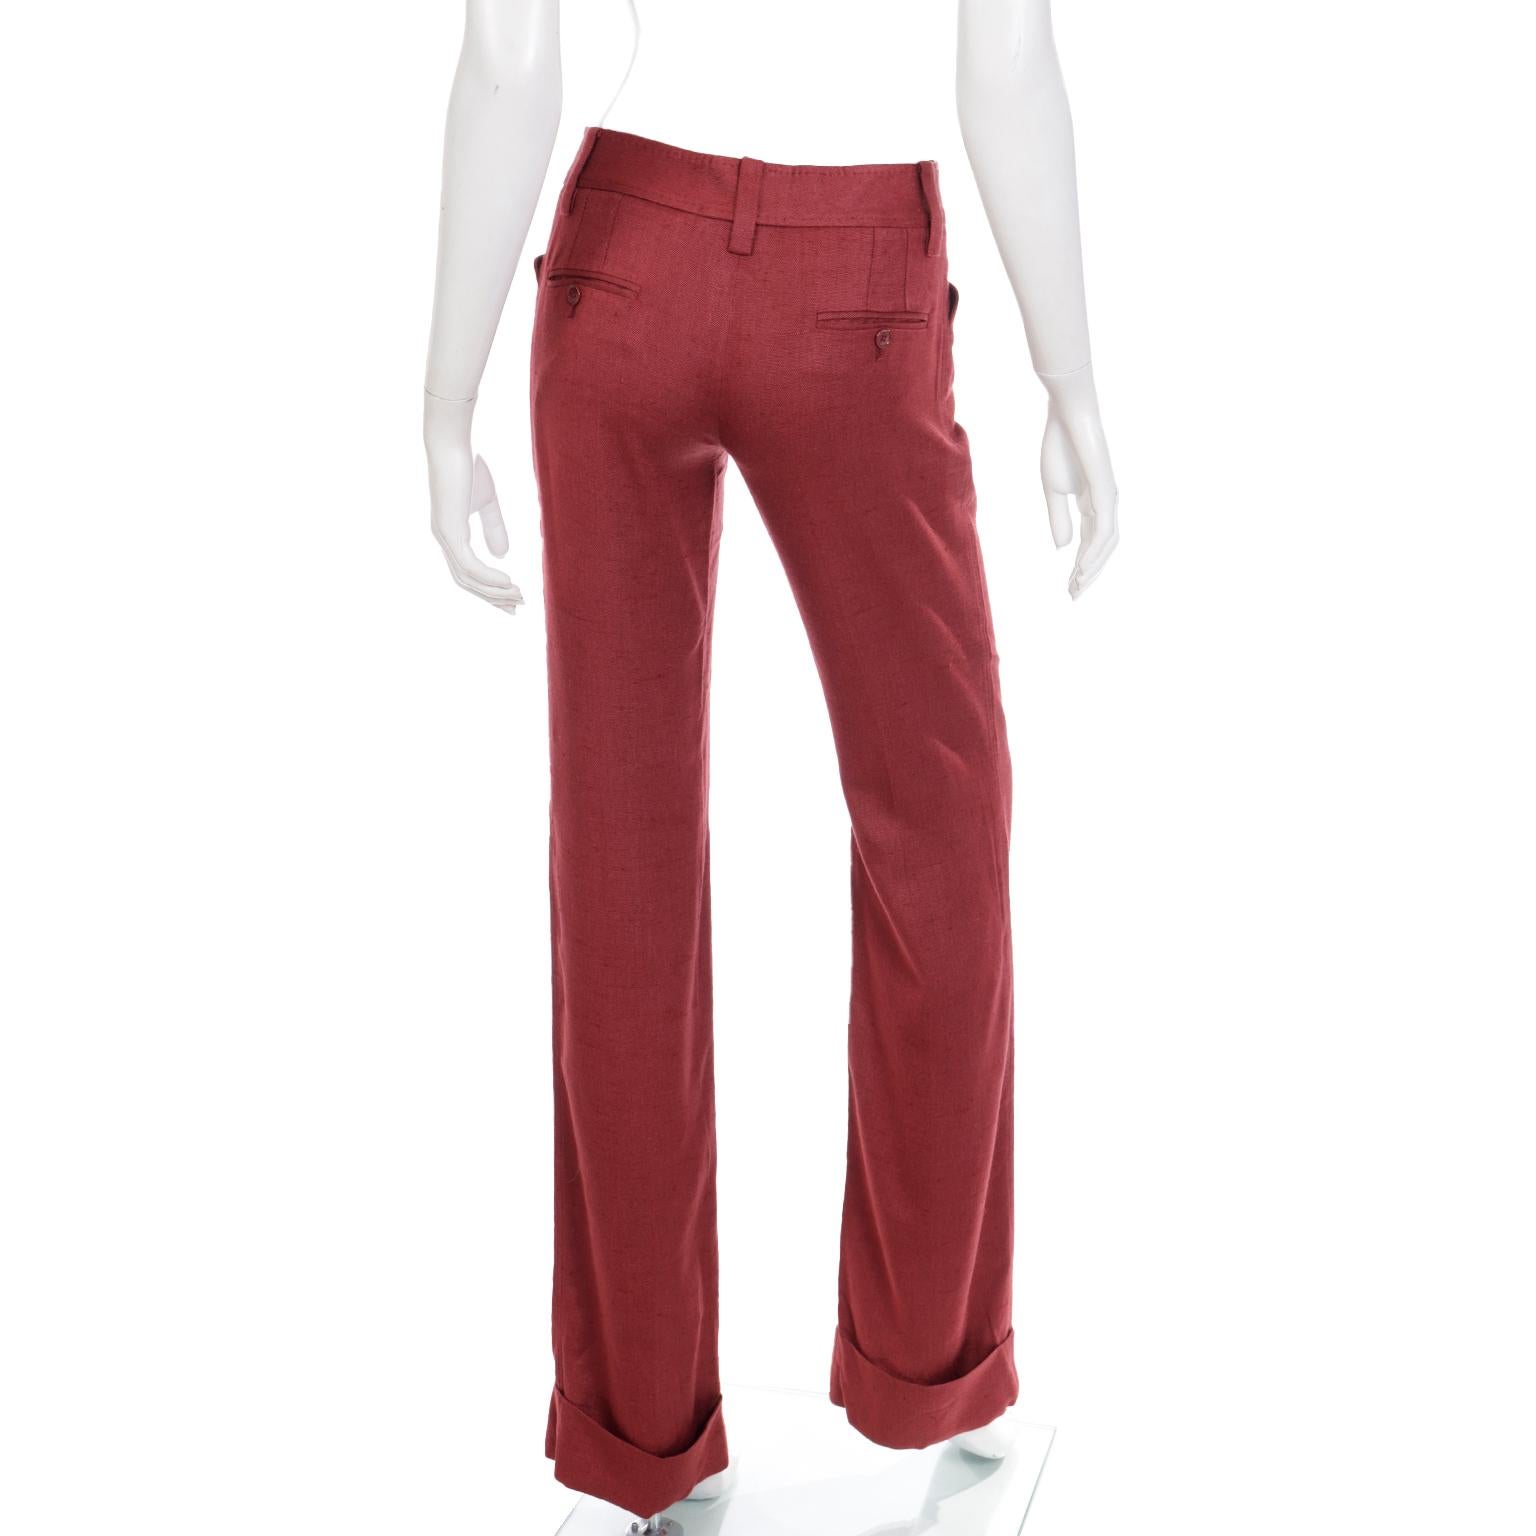 Brown Dolce & Gabbana Cardinal Red 100% Silk Trousers Deadstock with Original Tags For Sale